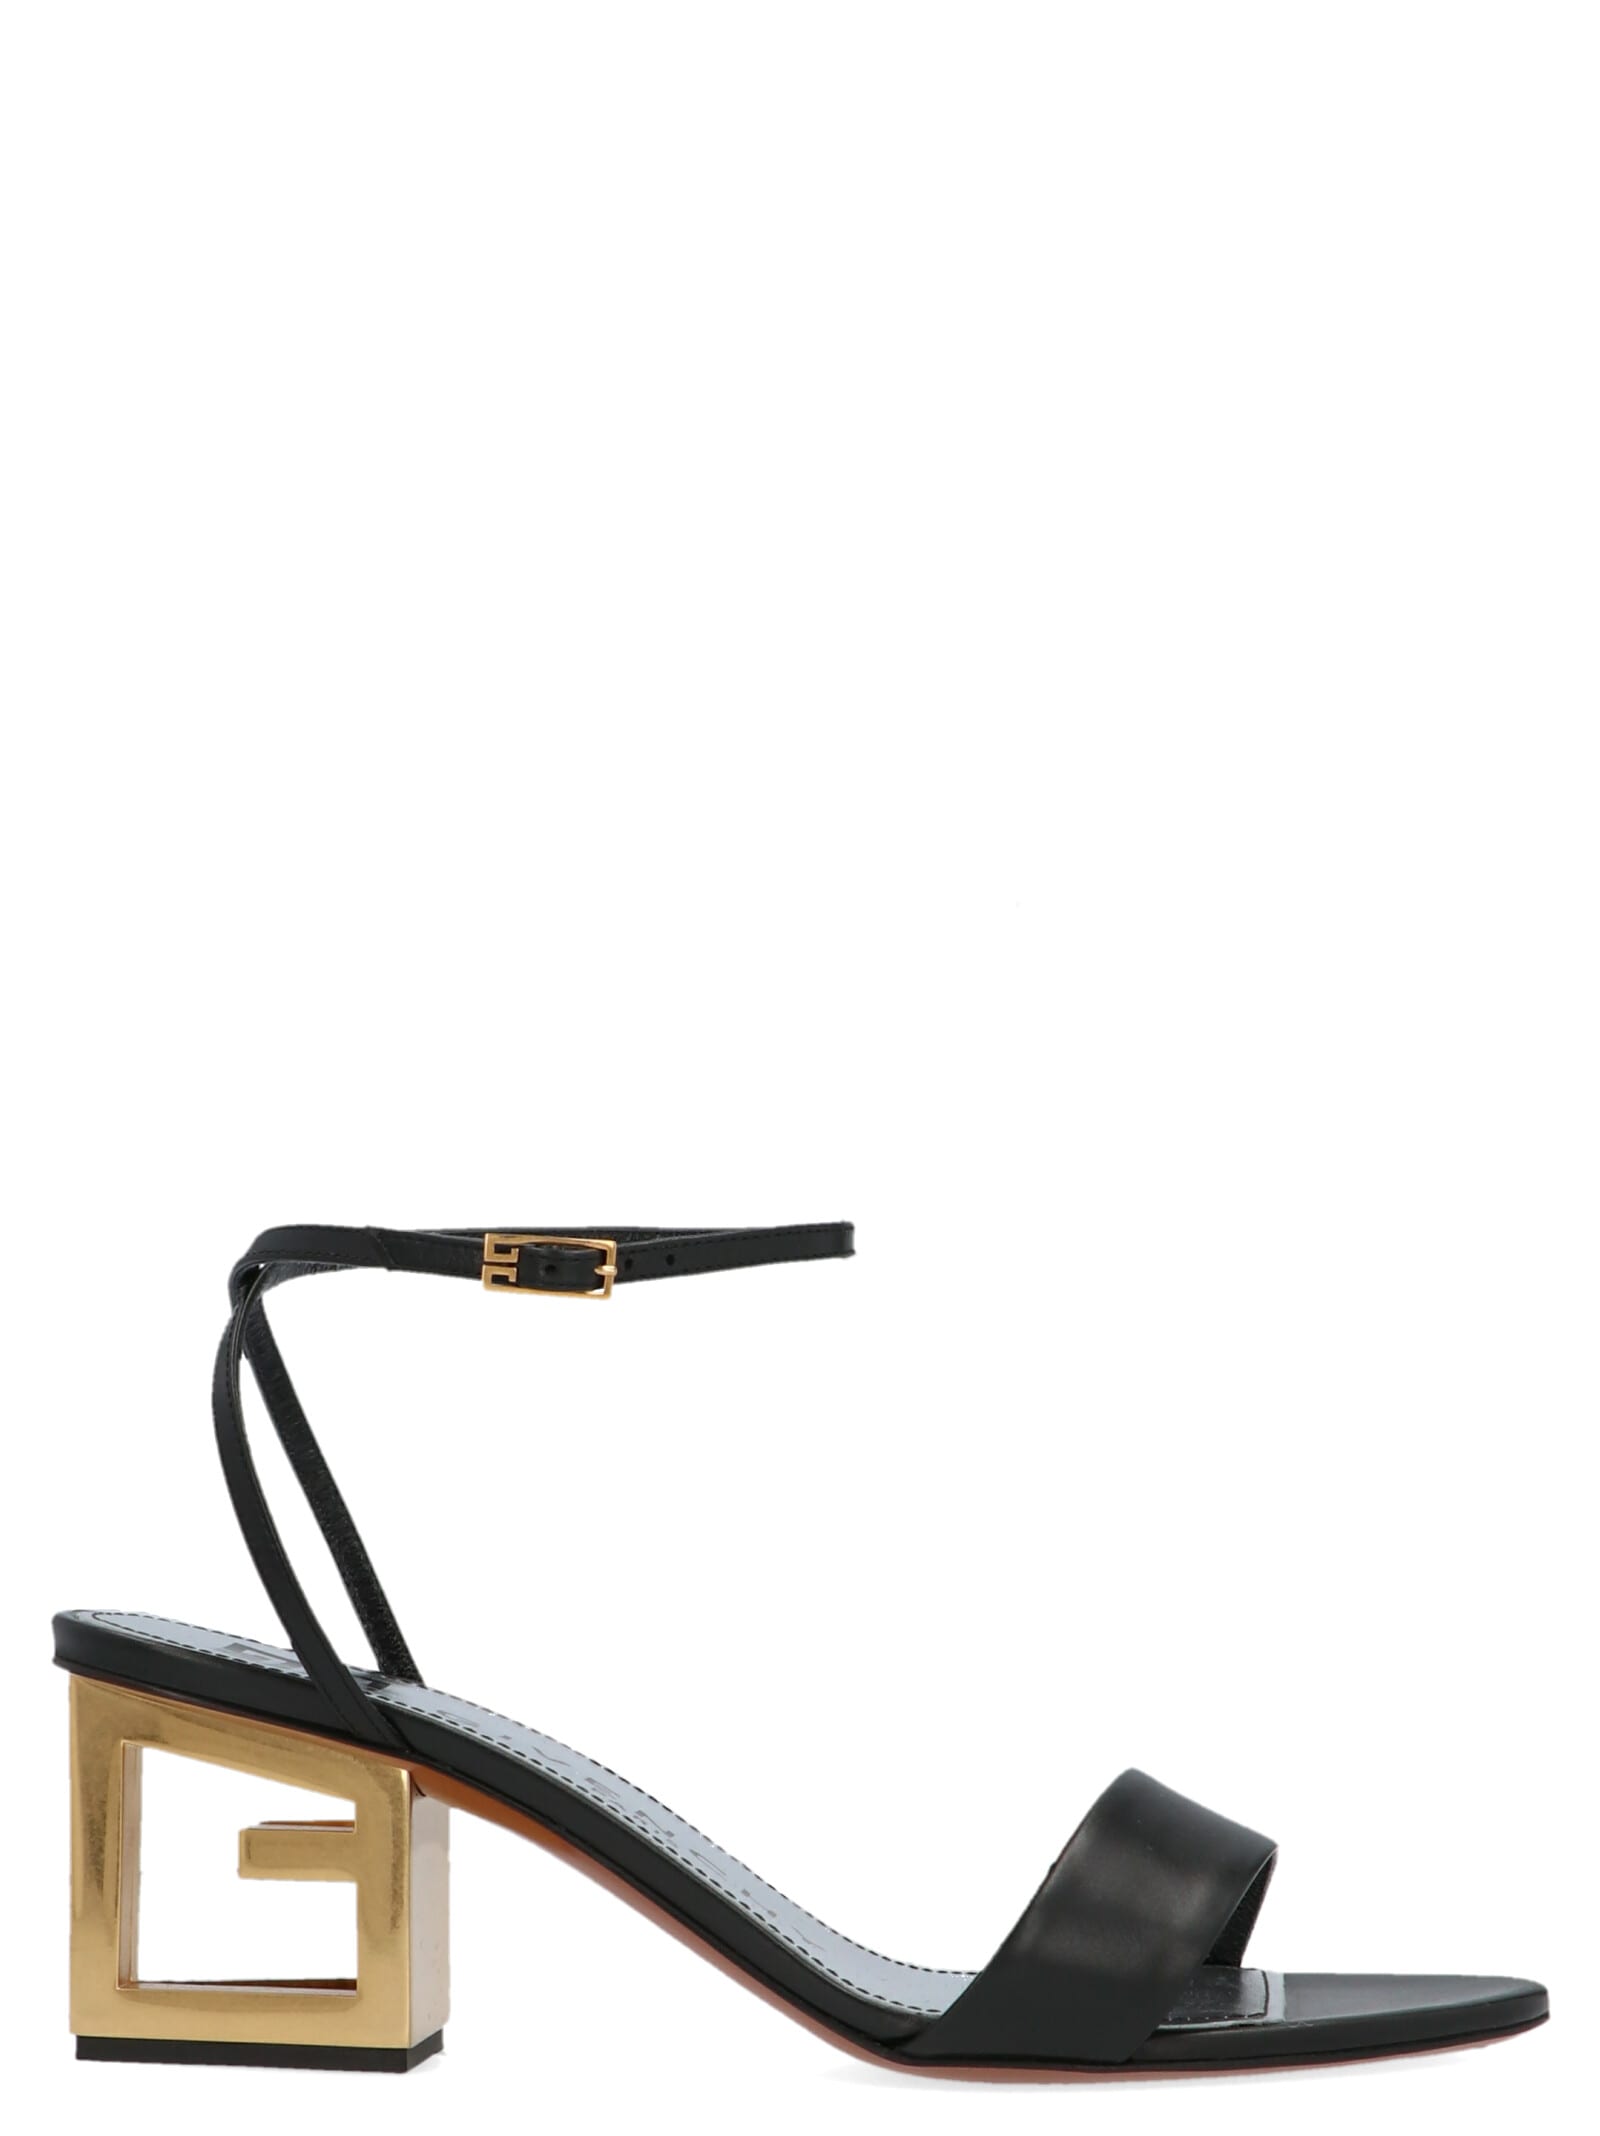 Givenchy Sandals | italist, ALWAYS LIKE 